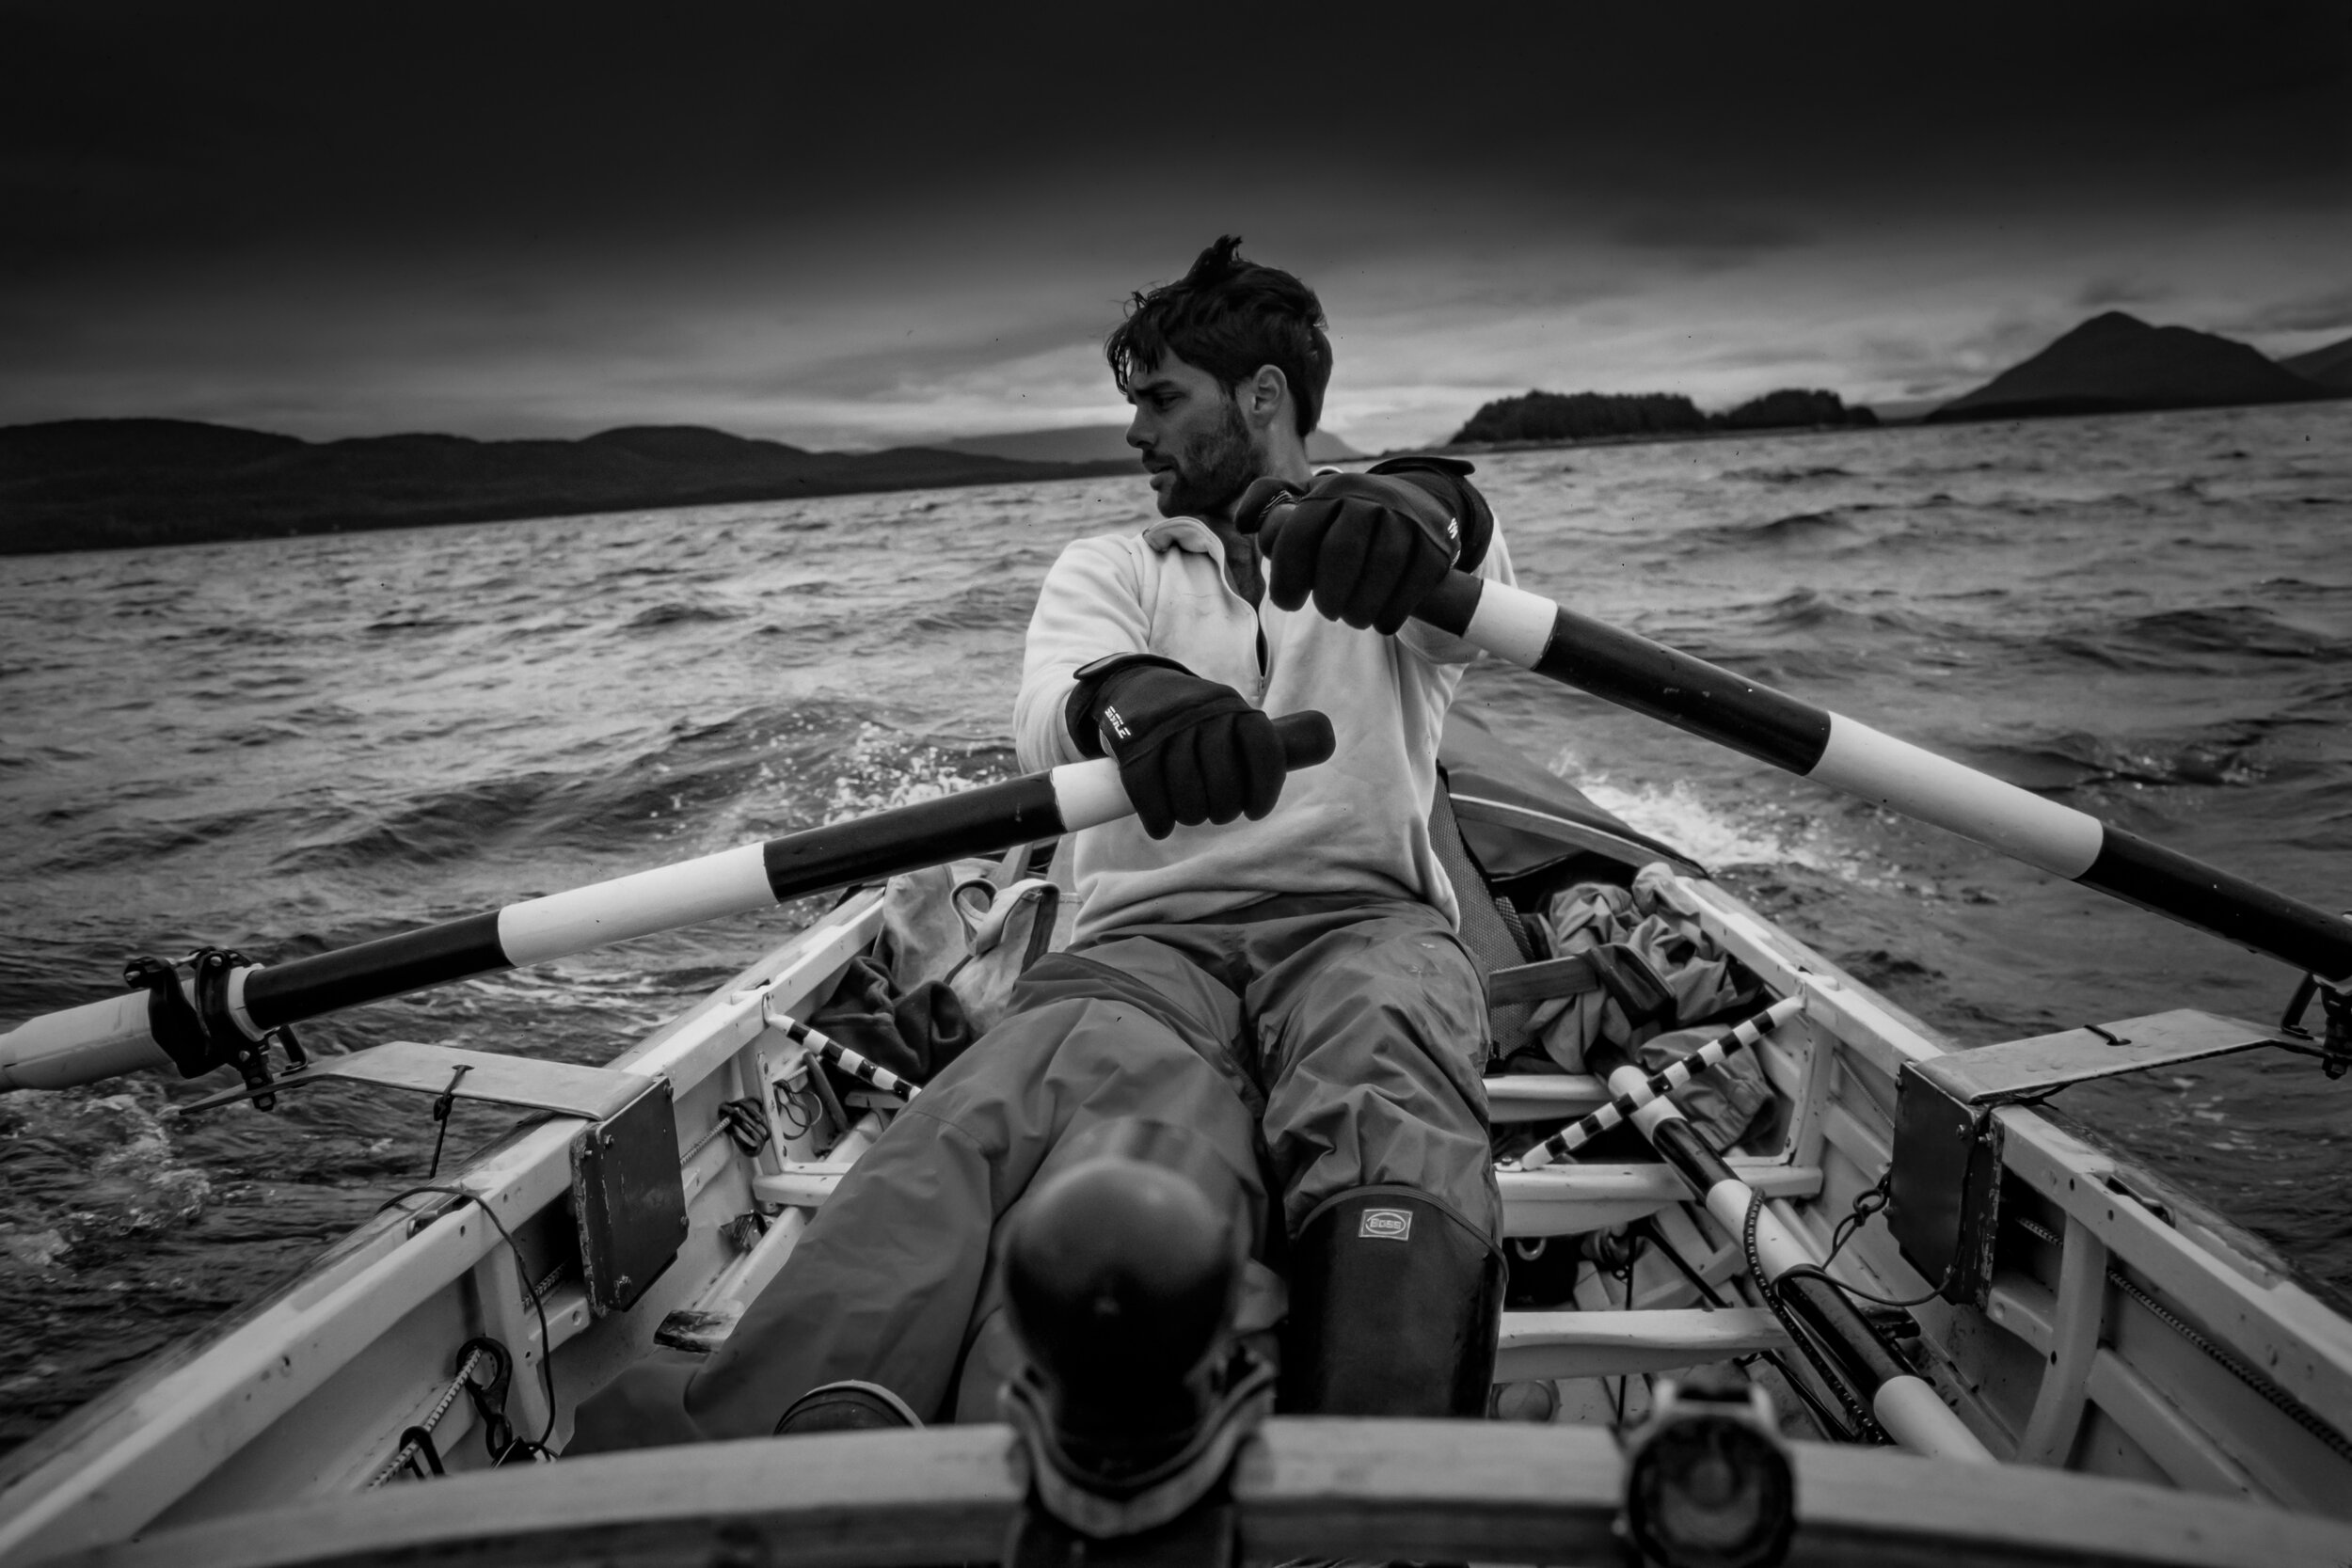  One of the most startling moments I have experienced in the wilderness happened one morning when Viju was rowing and we were about a half of a mile off of the coast in the Gulf of Alaska. We were intentionally going around a section of coast known a